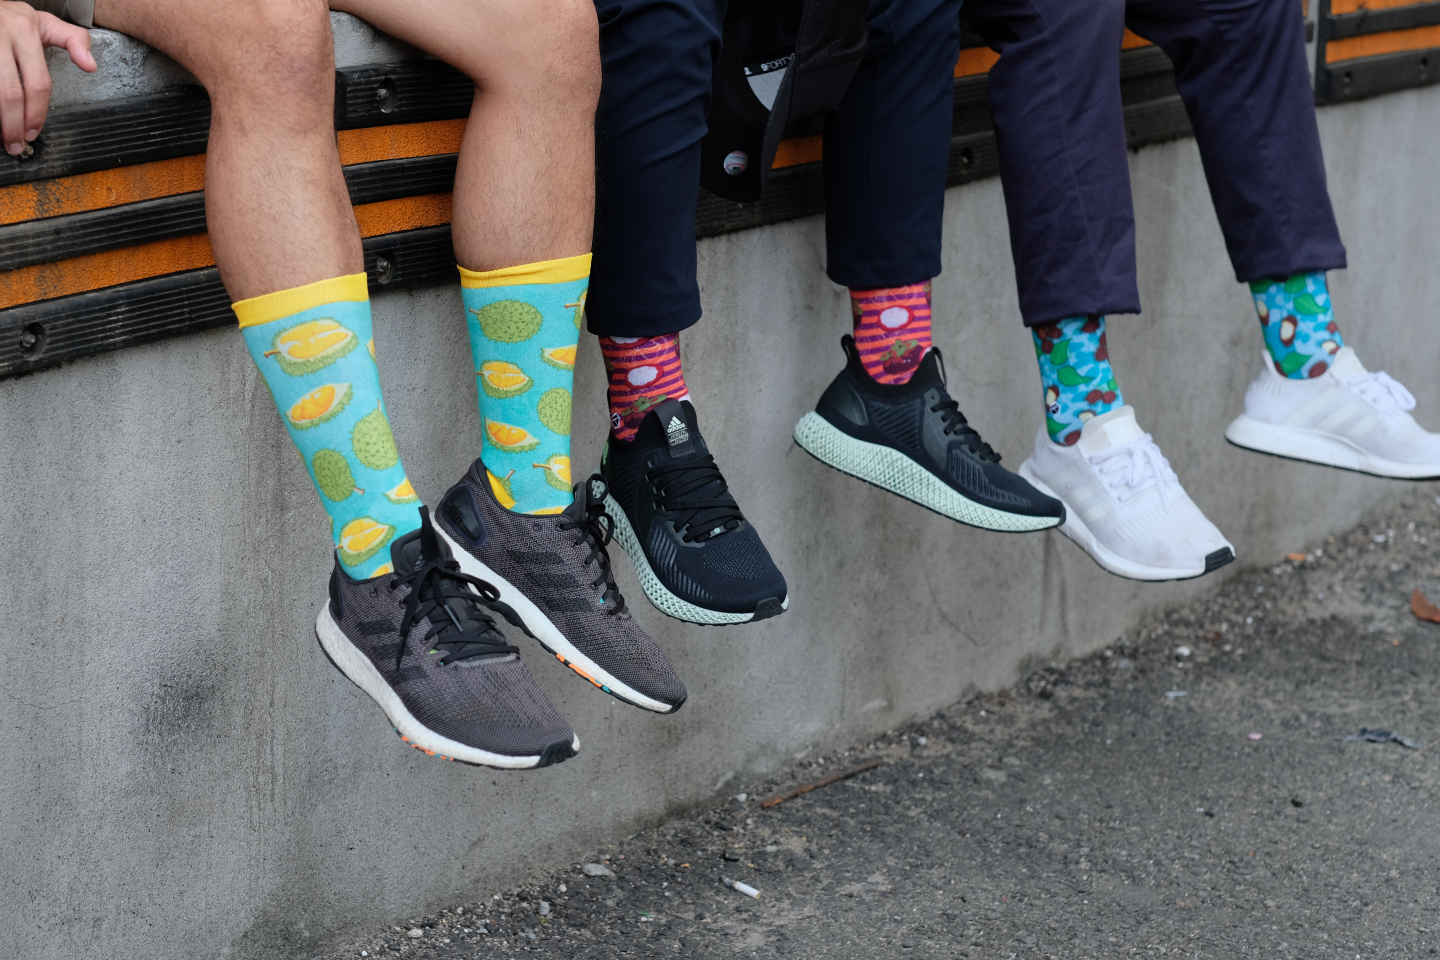 Put your best foot forward with Tale Socks' funky designs | Options ...